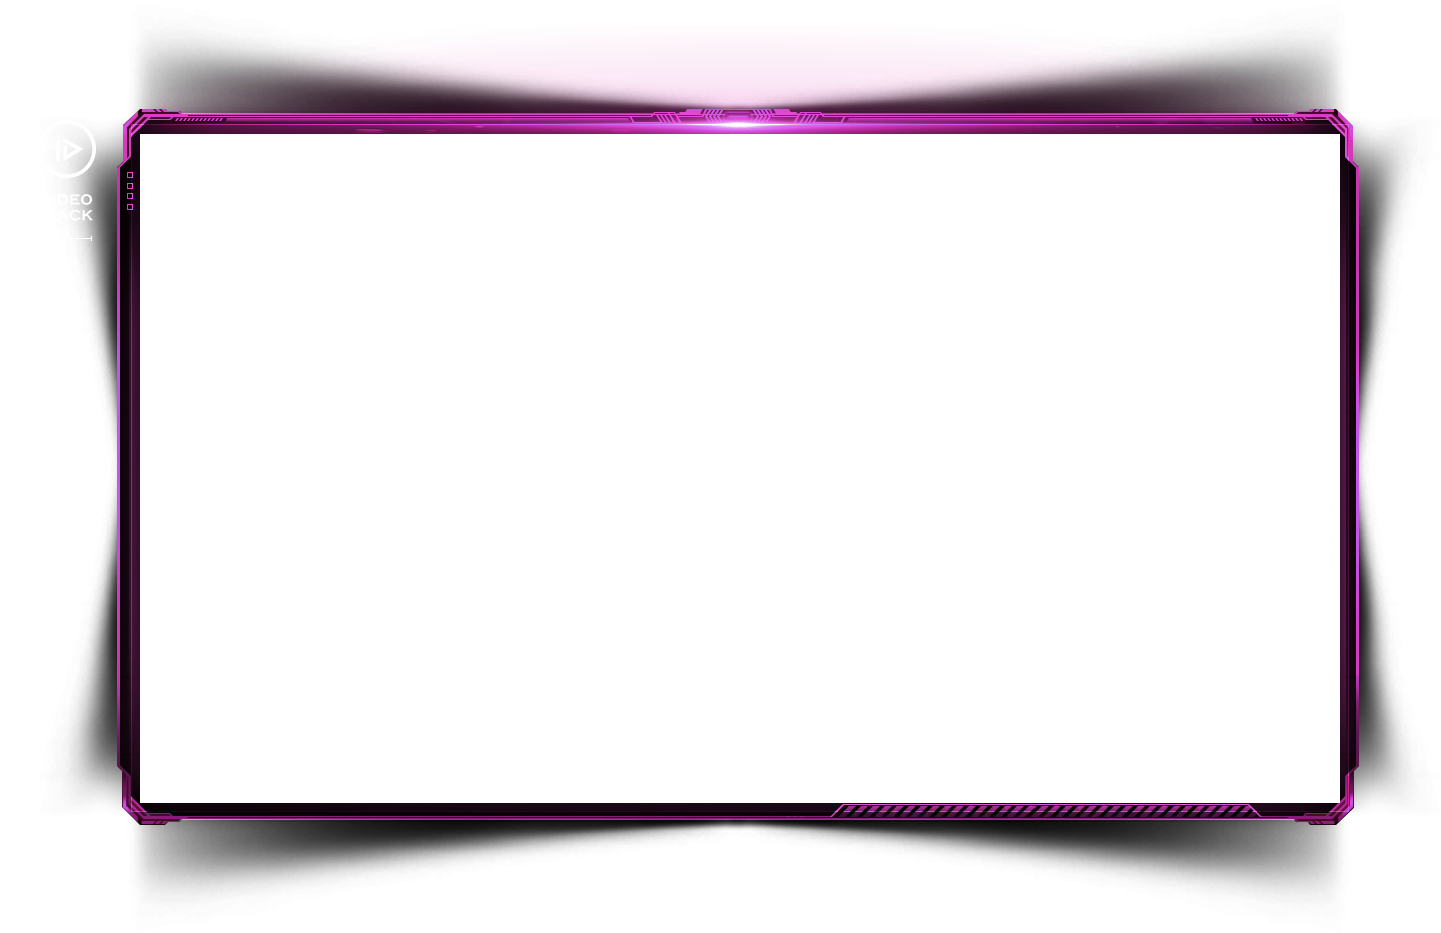 A Purple Rectangular Frame With A Black Background